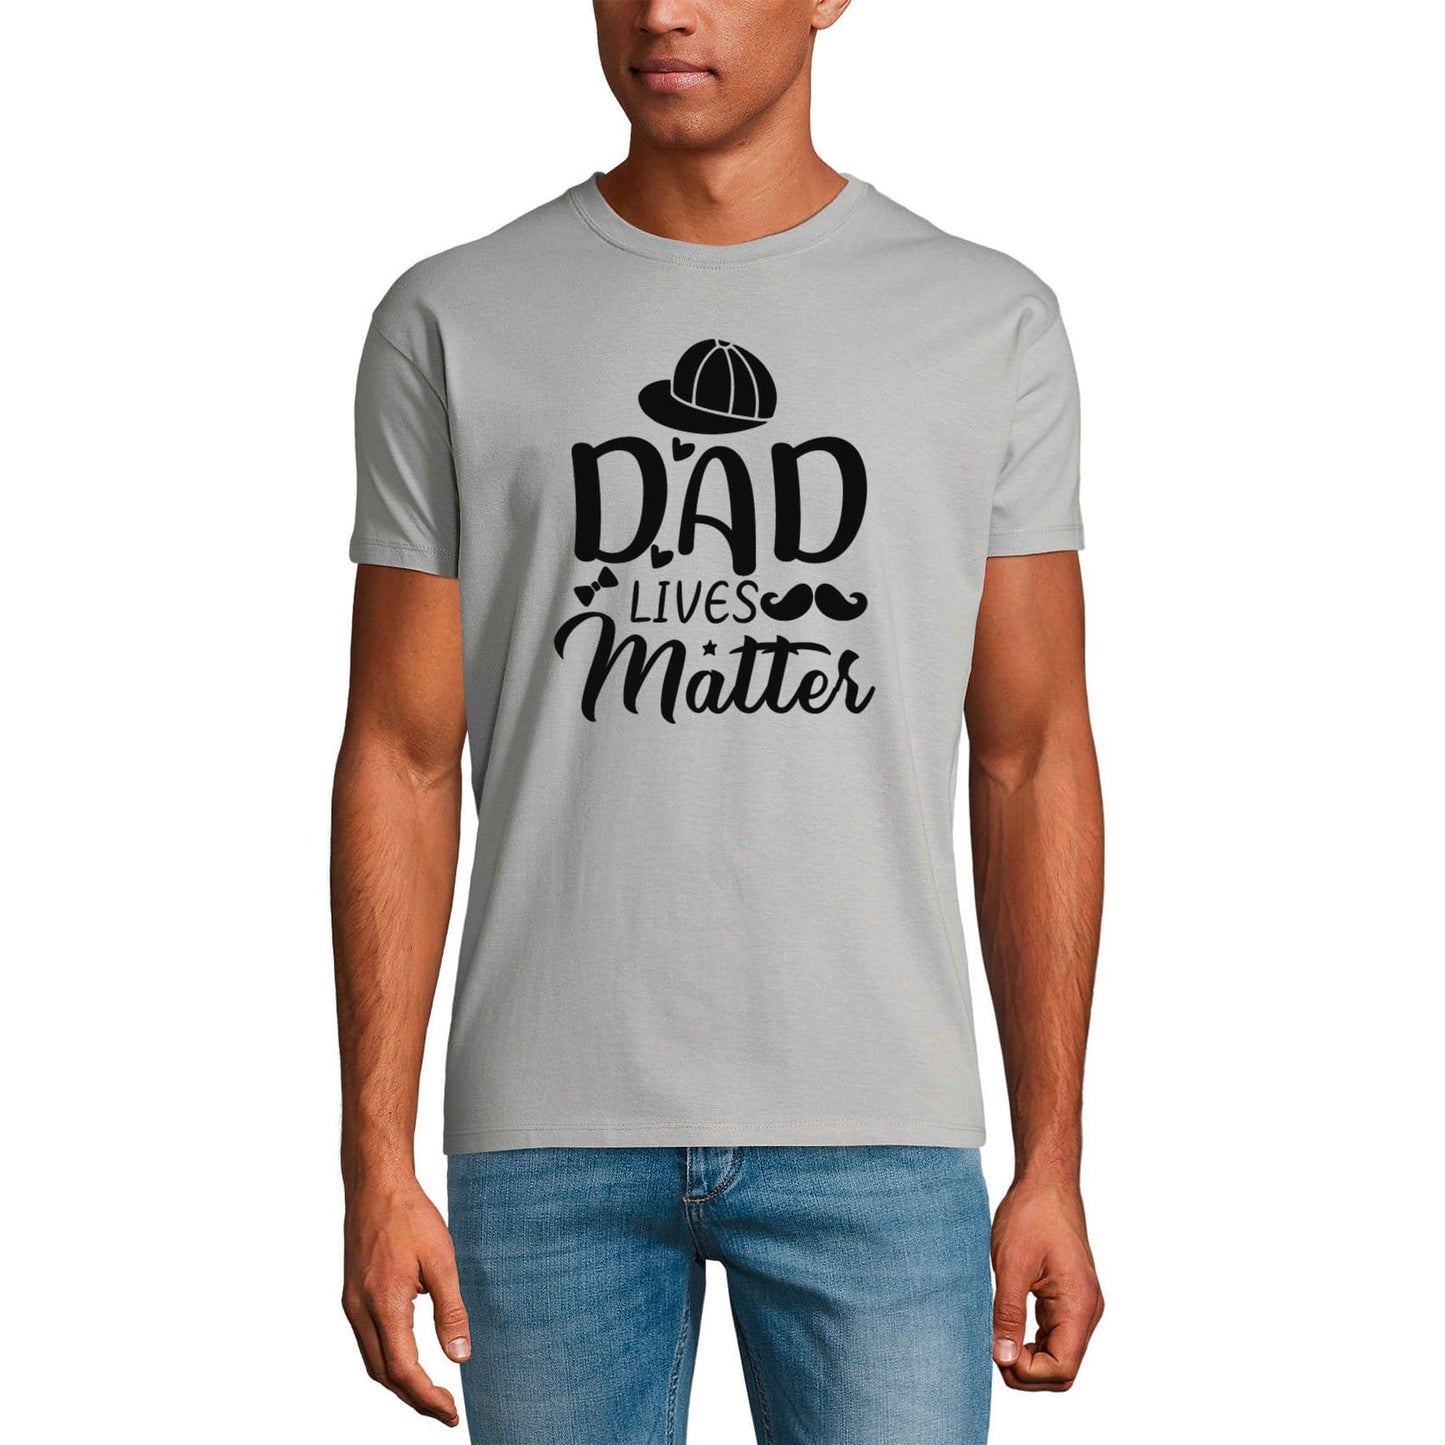 ULTRABASIC Men's Graphic T-Shirt Dad Lives Matter - Gift for Father's Day